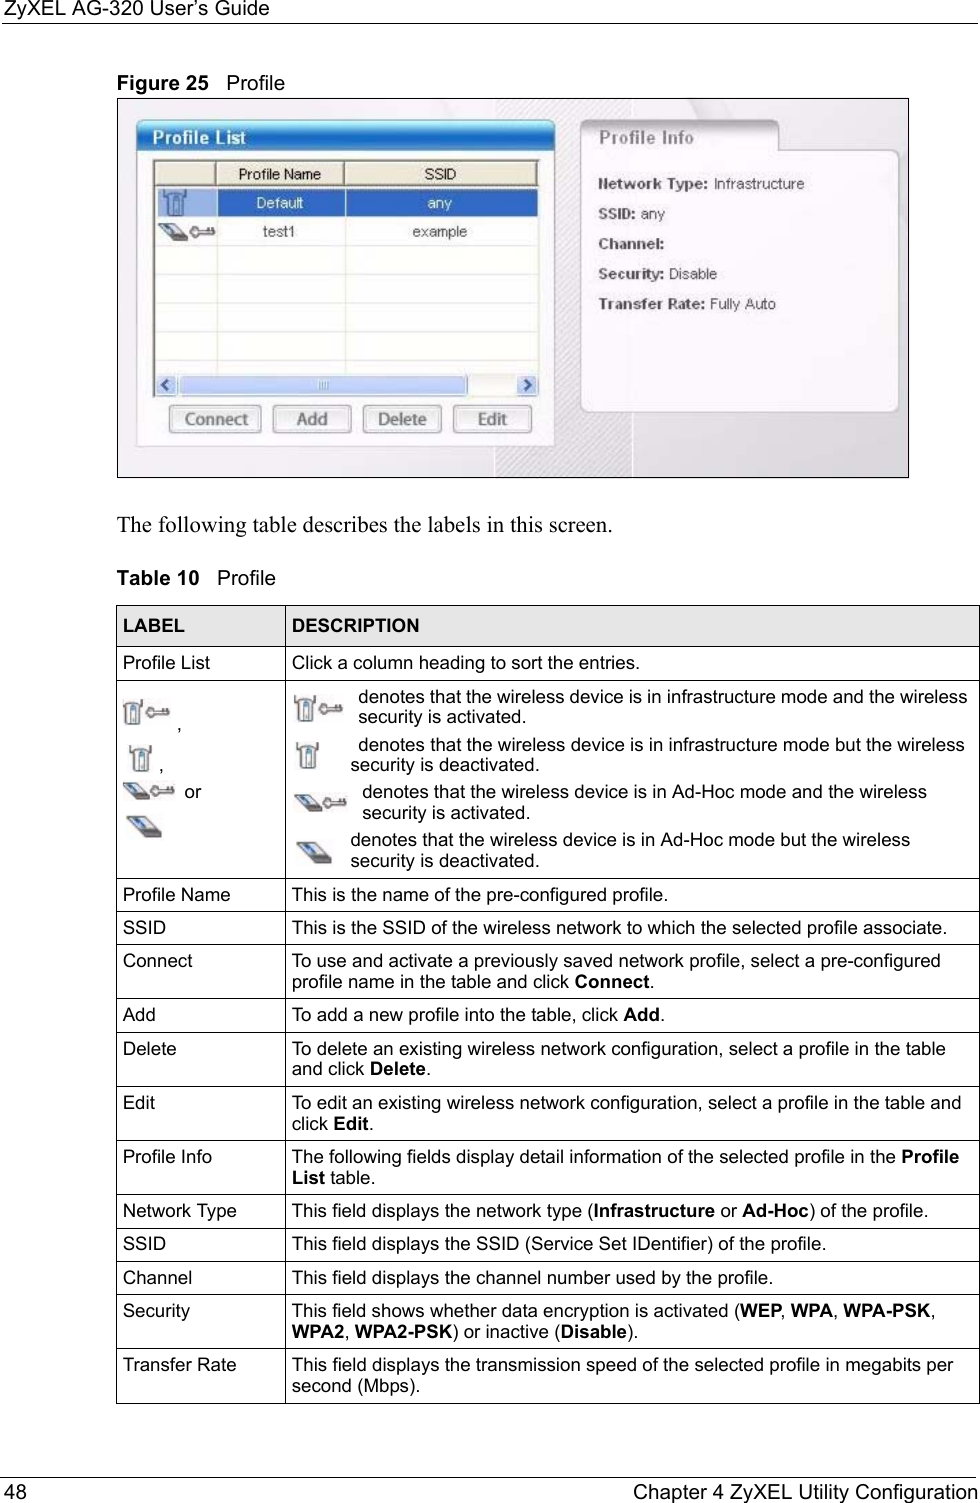 ZyXEL AG-320 User’s Guide48 Chapter 4 ZyXEL Utility ConfigurationFigure 25   Profile  The following table describes the labels in this screen. Table 10   Profile LABEL DESCRIPTIONProfile List Click a column heading to sort the entries.,, ordenotes that the wireless device is in infrastructure mode and the wireless security is activated.denotes that the wireless device is in infrastructure mode but the wireless security is deactivated.denotes that the wireless device is in Ad-Hoc mode and the wireless security is activated.denotes that the wireless device is in Ad-Hoc mode but the wireless security is deactivated.Profile Name This is the name of the pre-configured profile.SSID This is the SSID of the wireless network to which the selected profile associate.Connect  To use and activate a previously saved network profile, select a pre-configured profile name in the table and click Connect.Add  To add a new profile into the table, click Add.Delete To delete an existing wireless network configuration, select a profile in the table and click Delete.Edit To edit an existing wireless network configuration, select a profile in the table and click Edit.Profile Info The following fields display detail information of the selected profile in the Profile List table.Network Type This field displays the network type (Infrastructure or Ad-Hoc) of the profile.SSID This field displays the SSID (Service Set IDentifier) of the profile.Channel This field displays the channel number used by the profile.Security This field shows whether data encryption is activated (WEP, WPA, WPA-PSK, WPA2, WPA2-PSK) or inactive (Disable).Transfer Rate This field displays the transmission speed of the selected profile in megabits per second (Mbps).